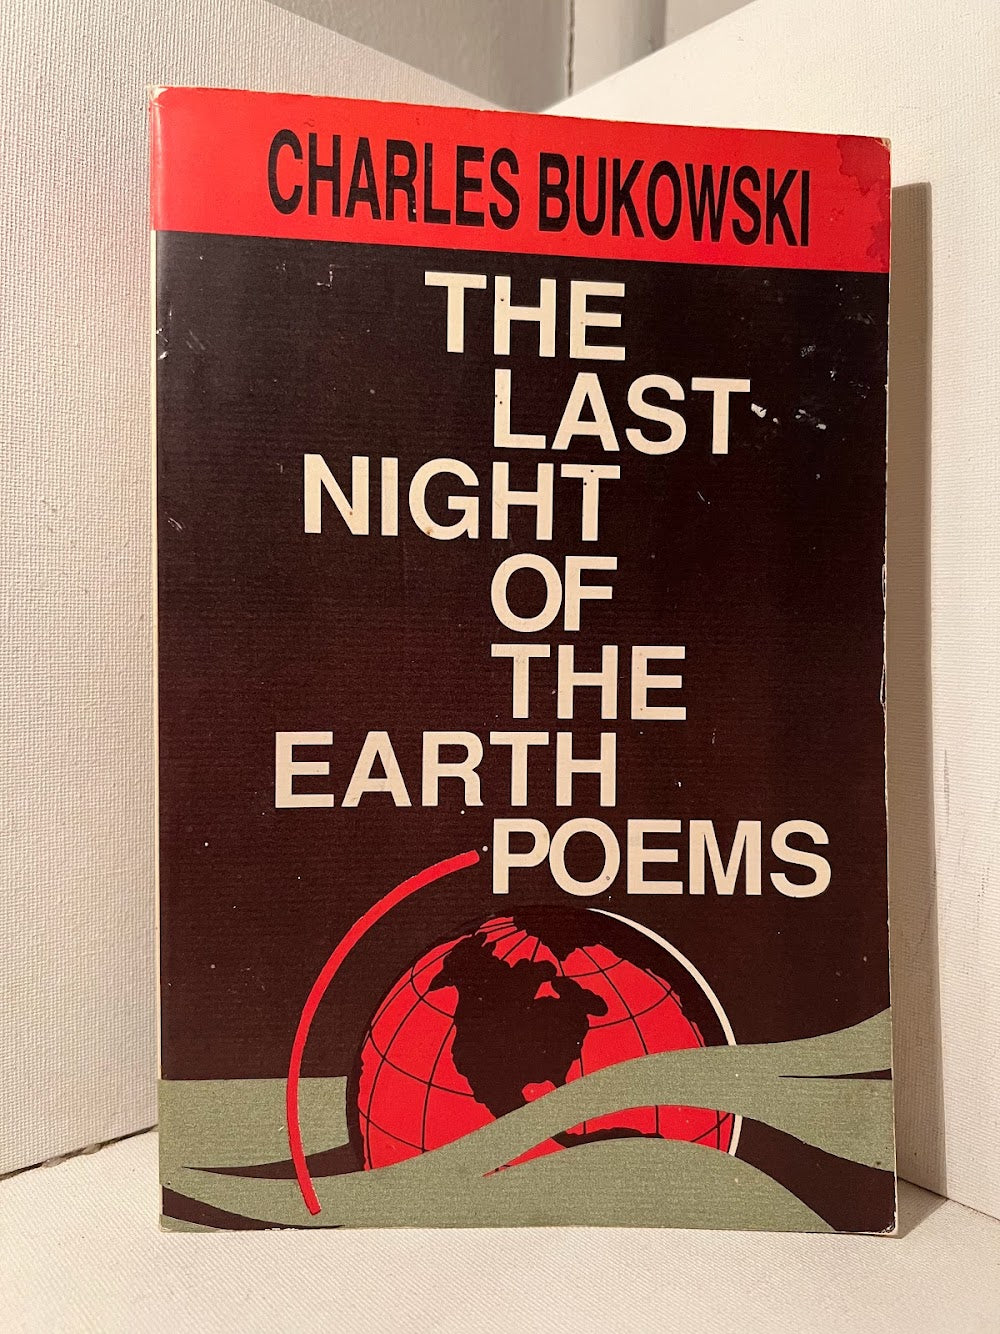 The Last Night of the Earth Poems by Charles Bukowski